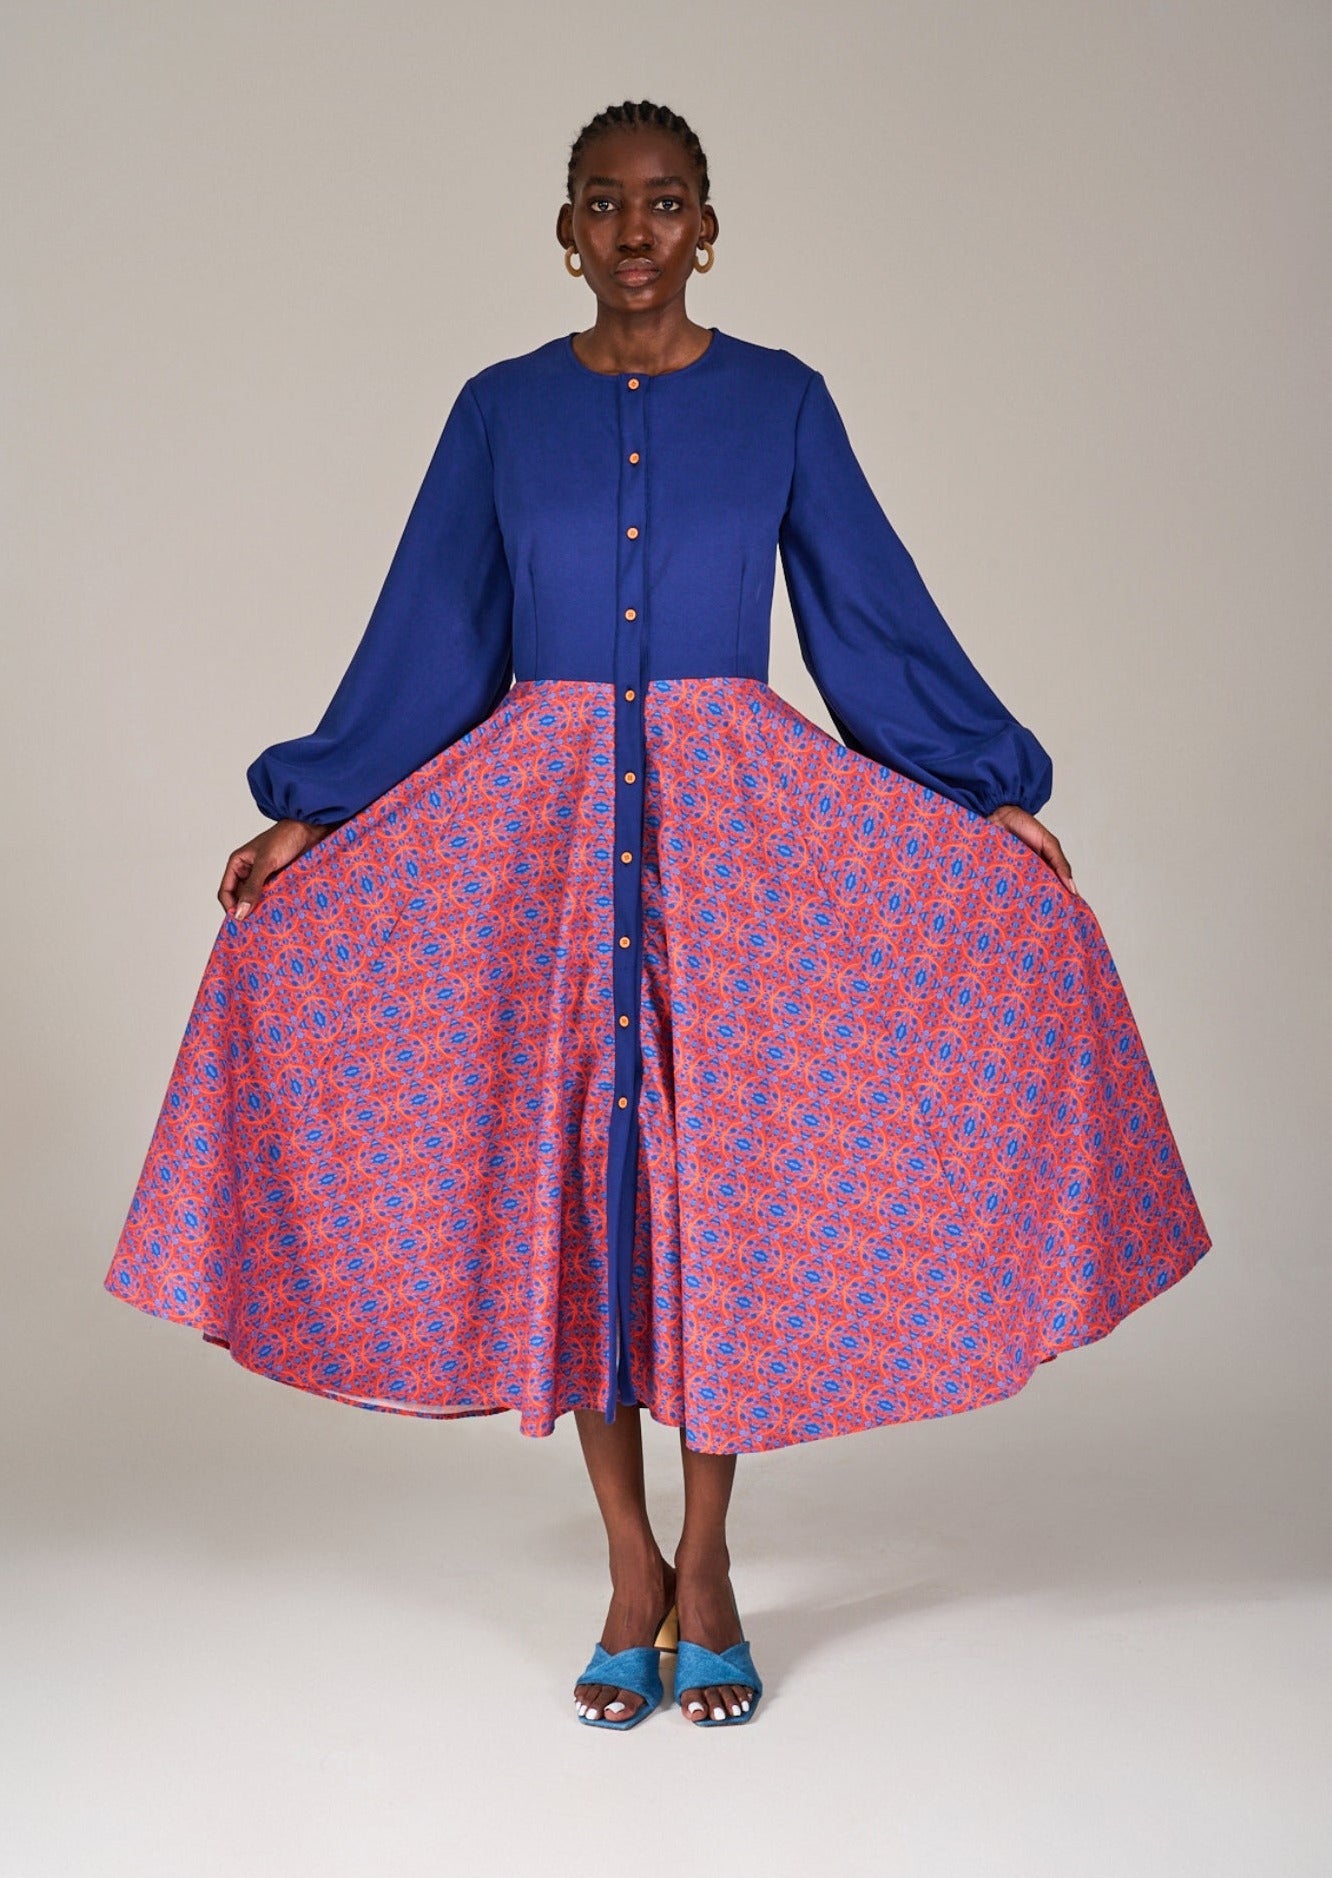 Model in the KAHINDO Kirstenbosch Shirtdress holding both sides of the full skirt